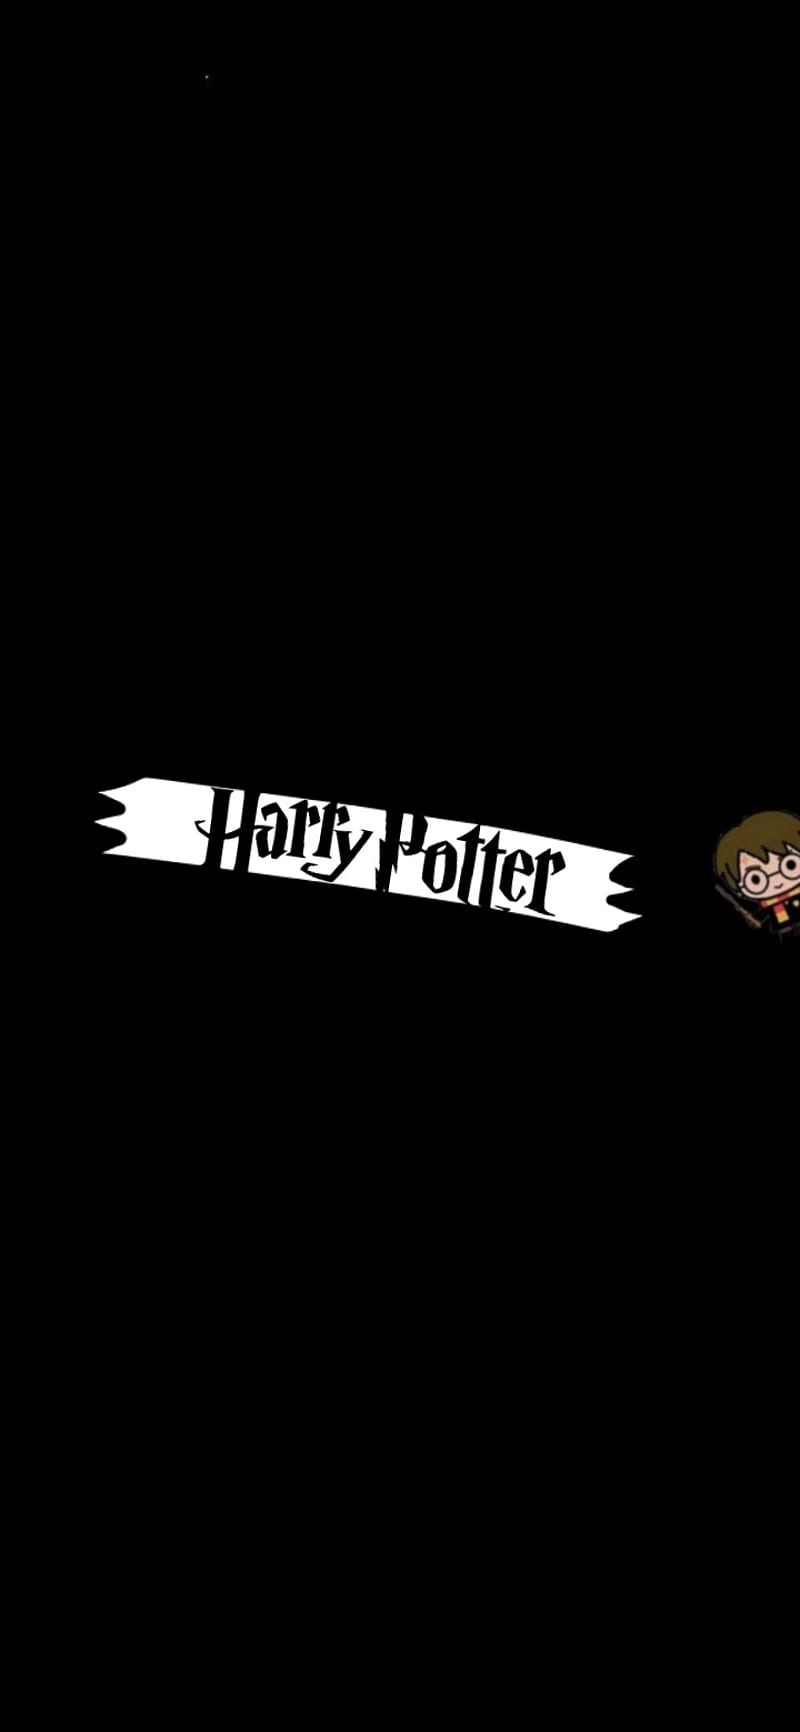 Harry Potter wallpaper by Lesweldster96  Download on ZEDGE  643b